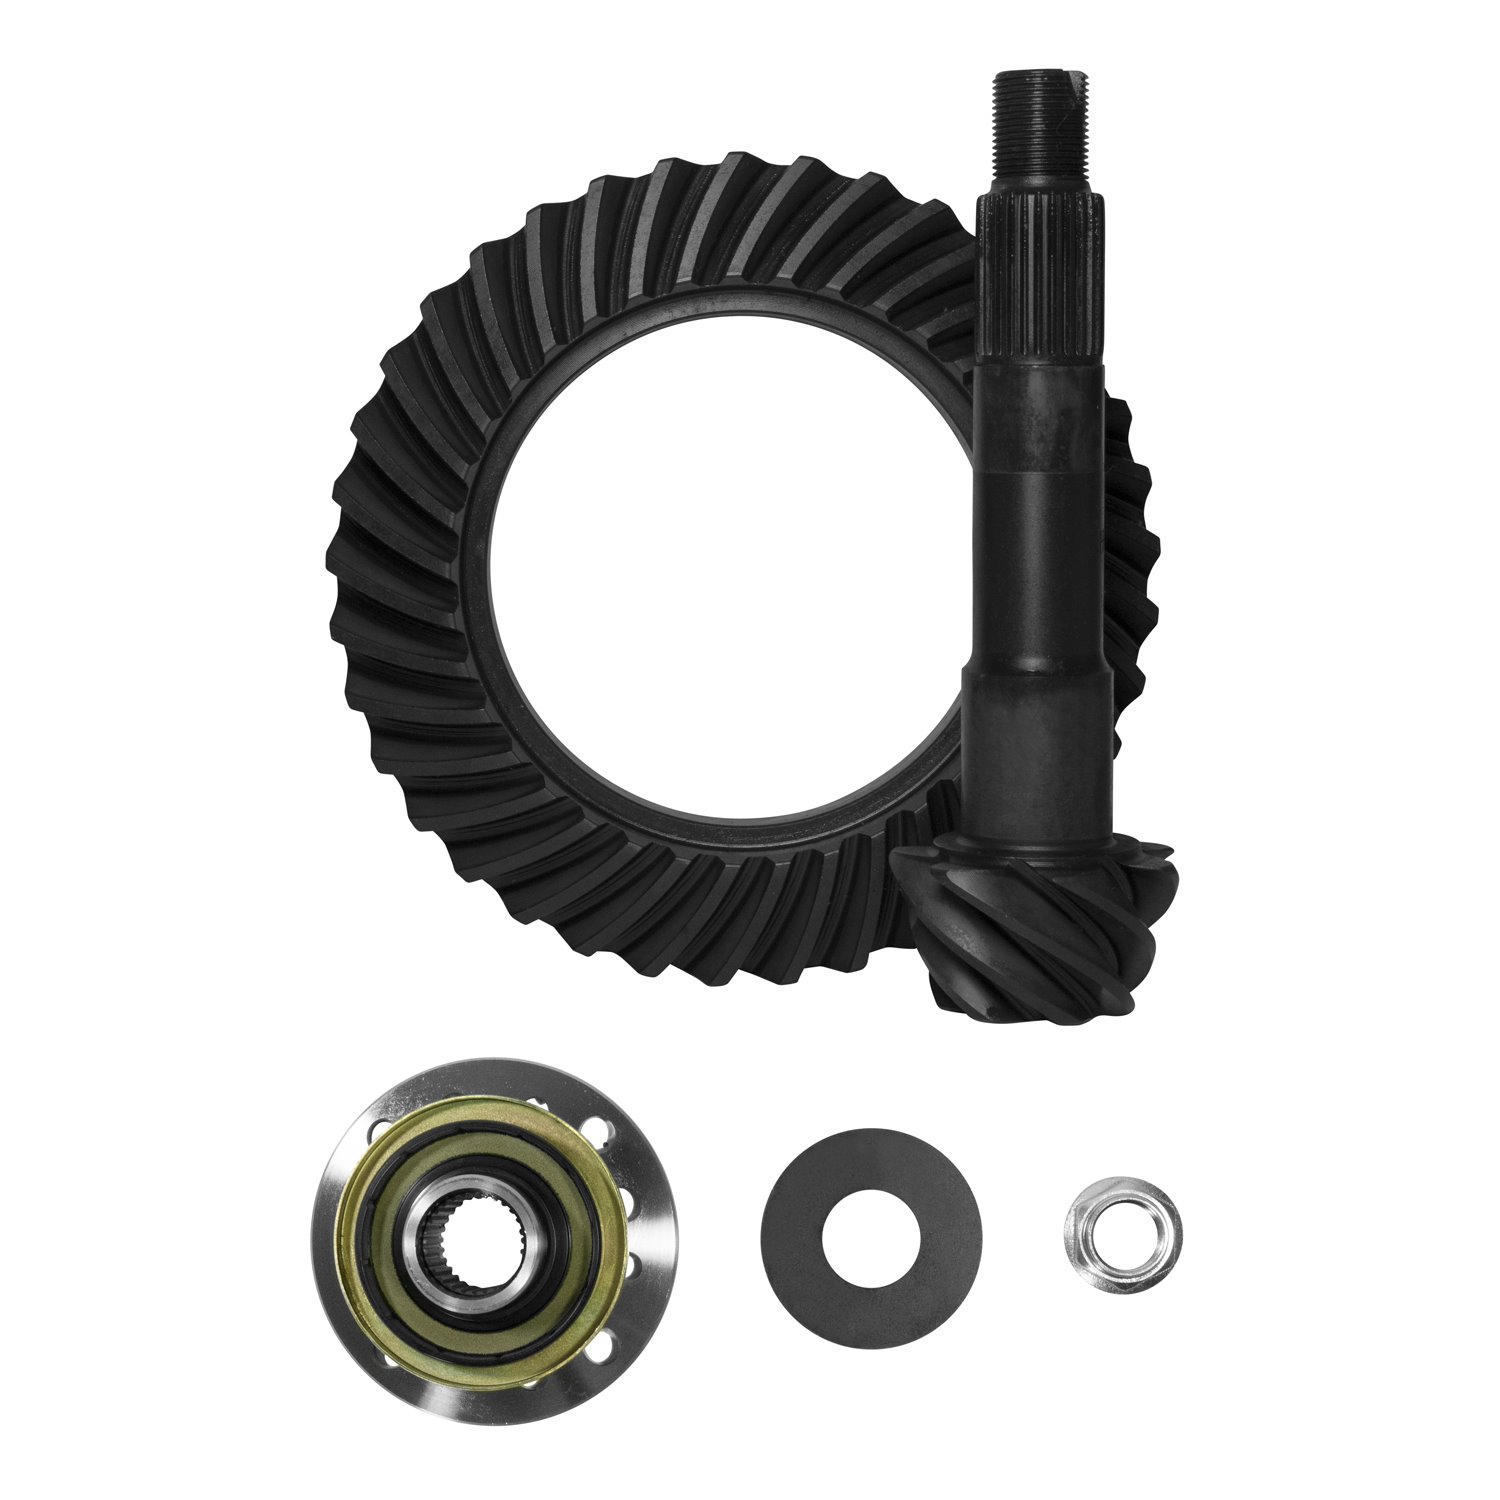 USA Standard ZG T8-456K Ring & Pinion Gear Set, For Toyota 8 in., 4.56 Ratio